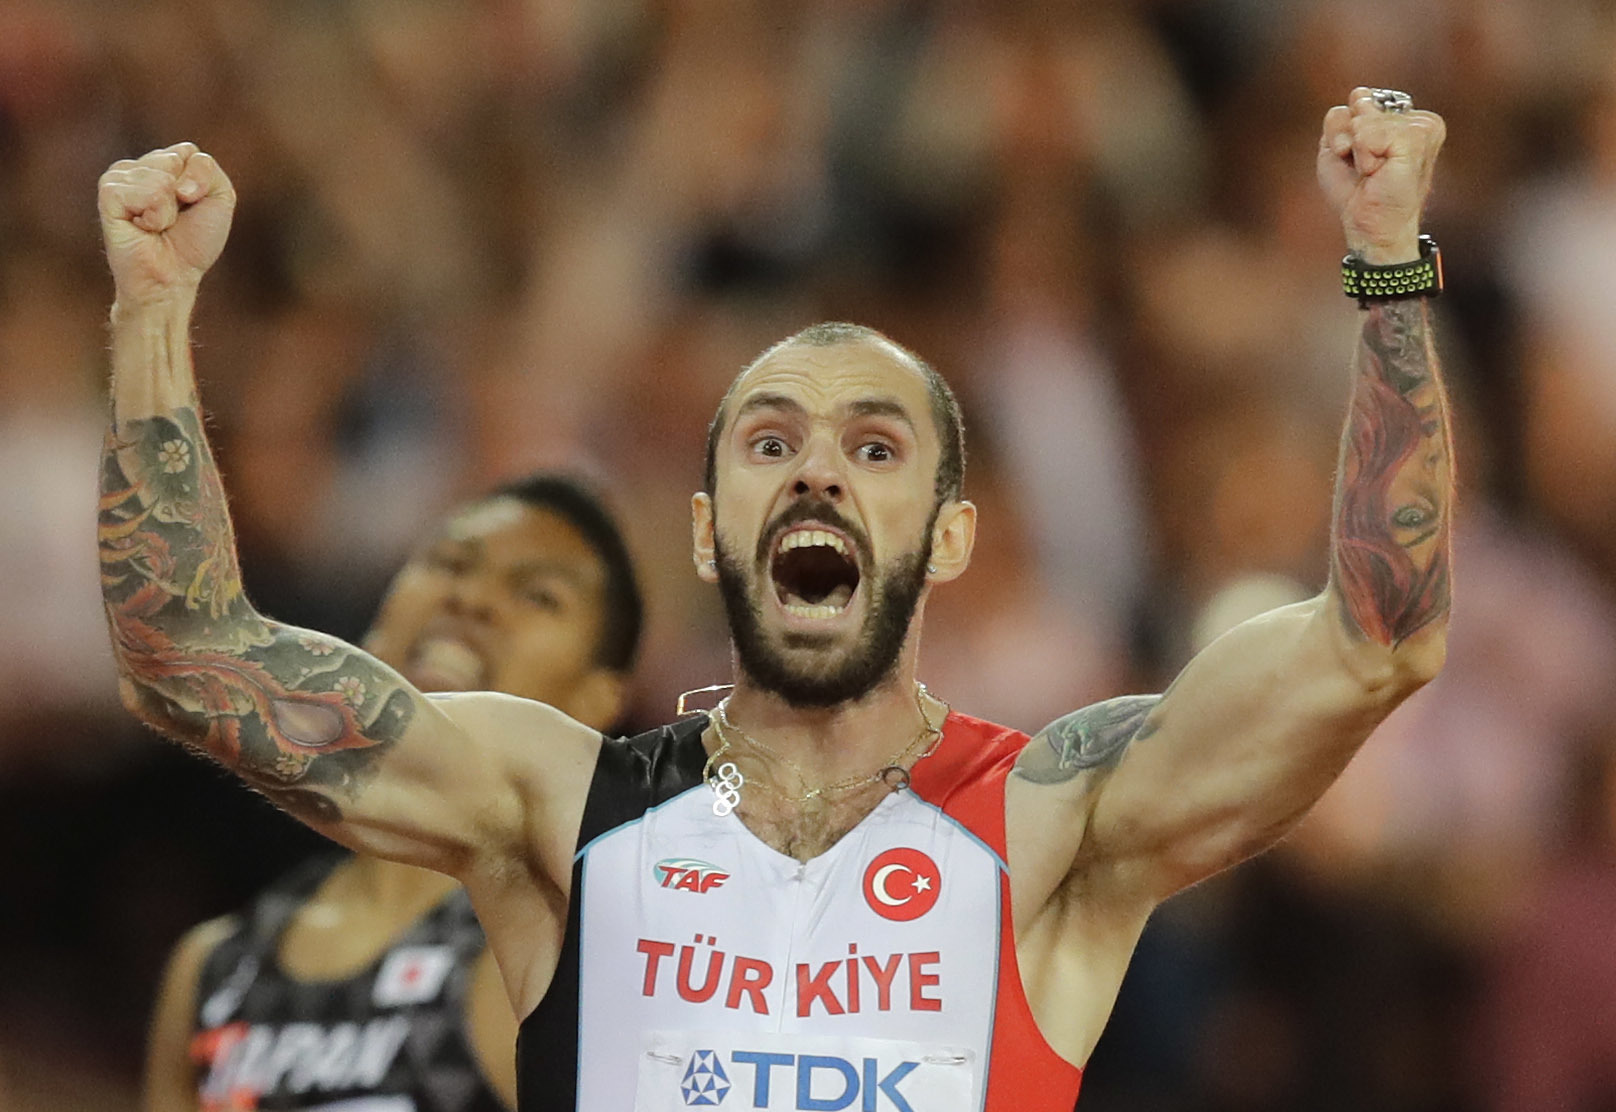 Turkey's Ramil Guliyev crosses the line to win gold in the men's 200-meter final during the World Athletics Championships in London Thursday, Aug. 10, 2017.